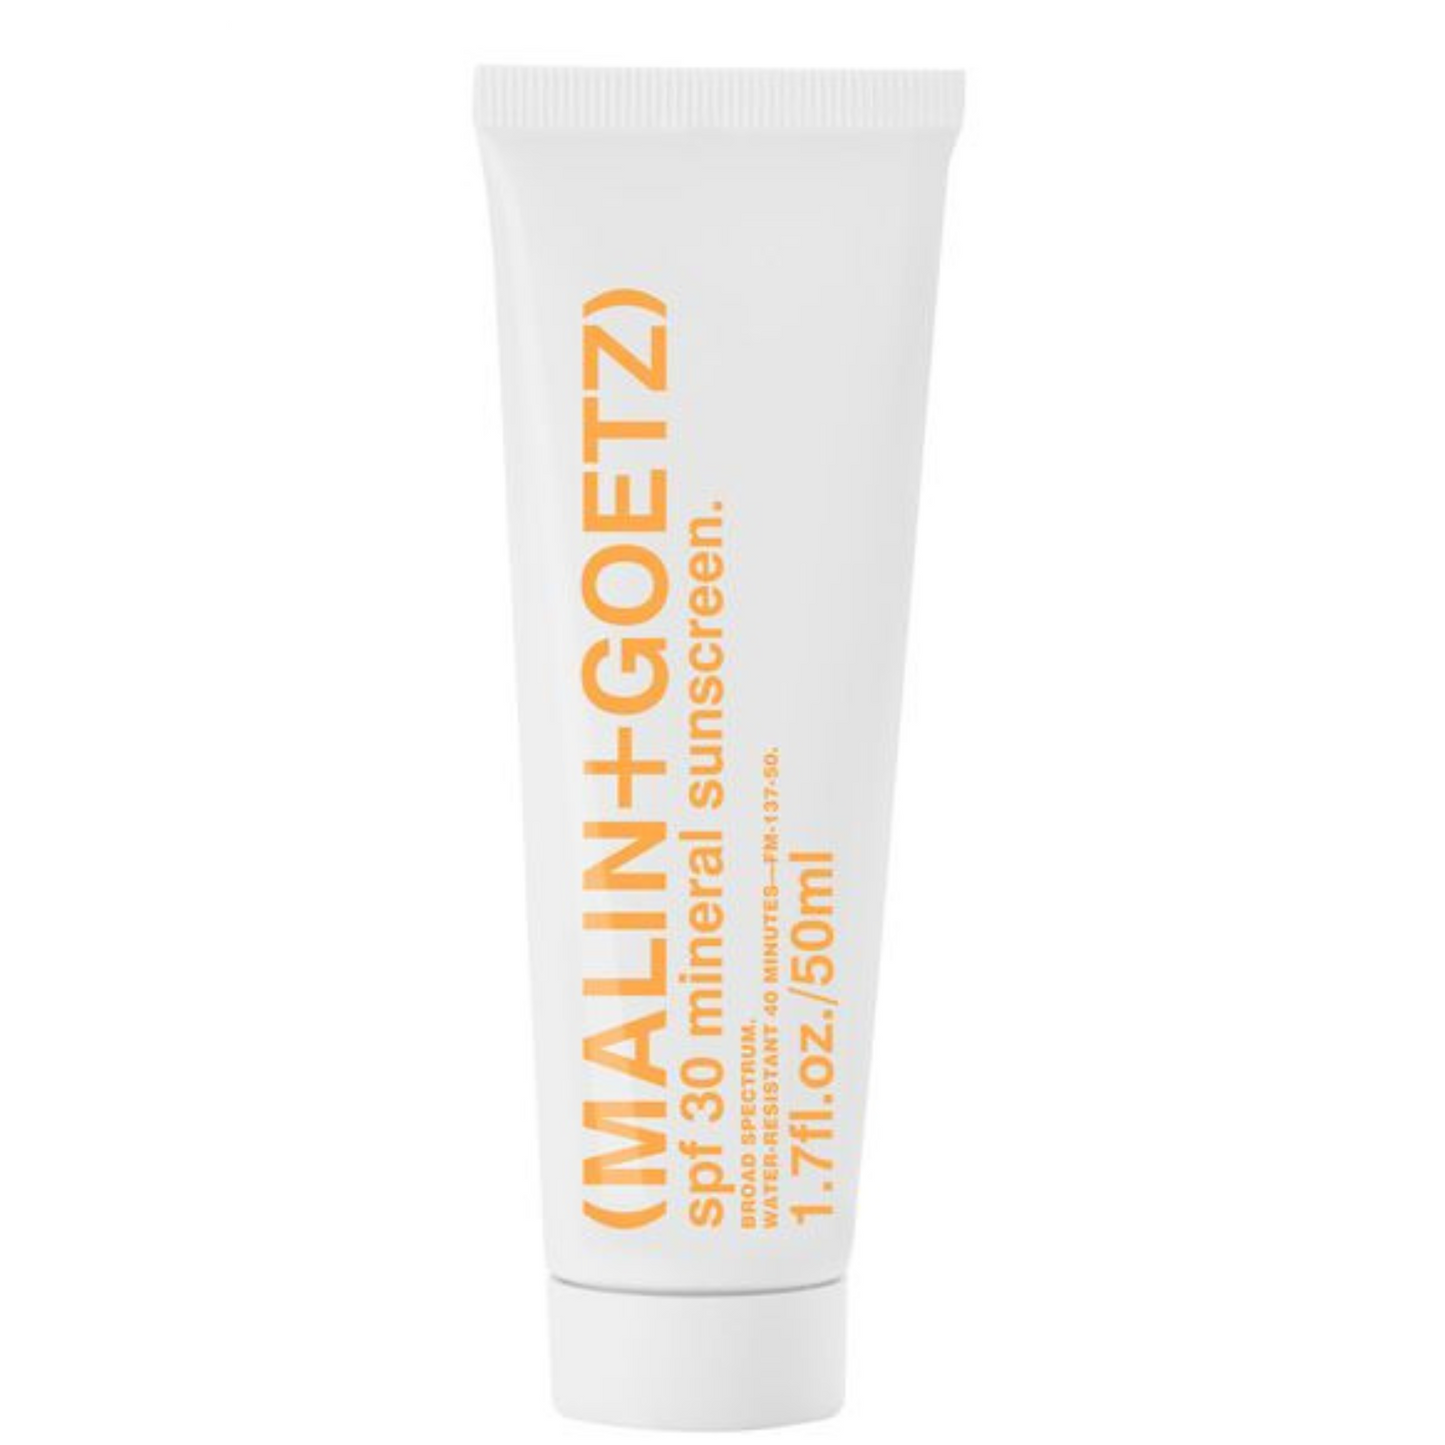 Primary Image of SPF 30 Mineral Sunscreen